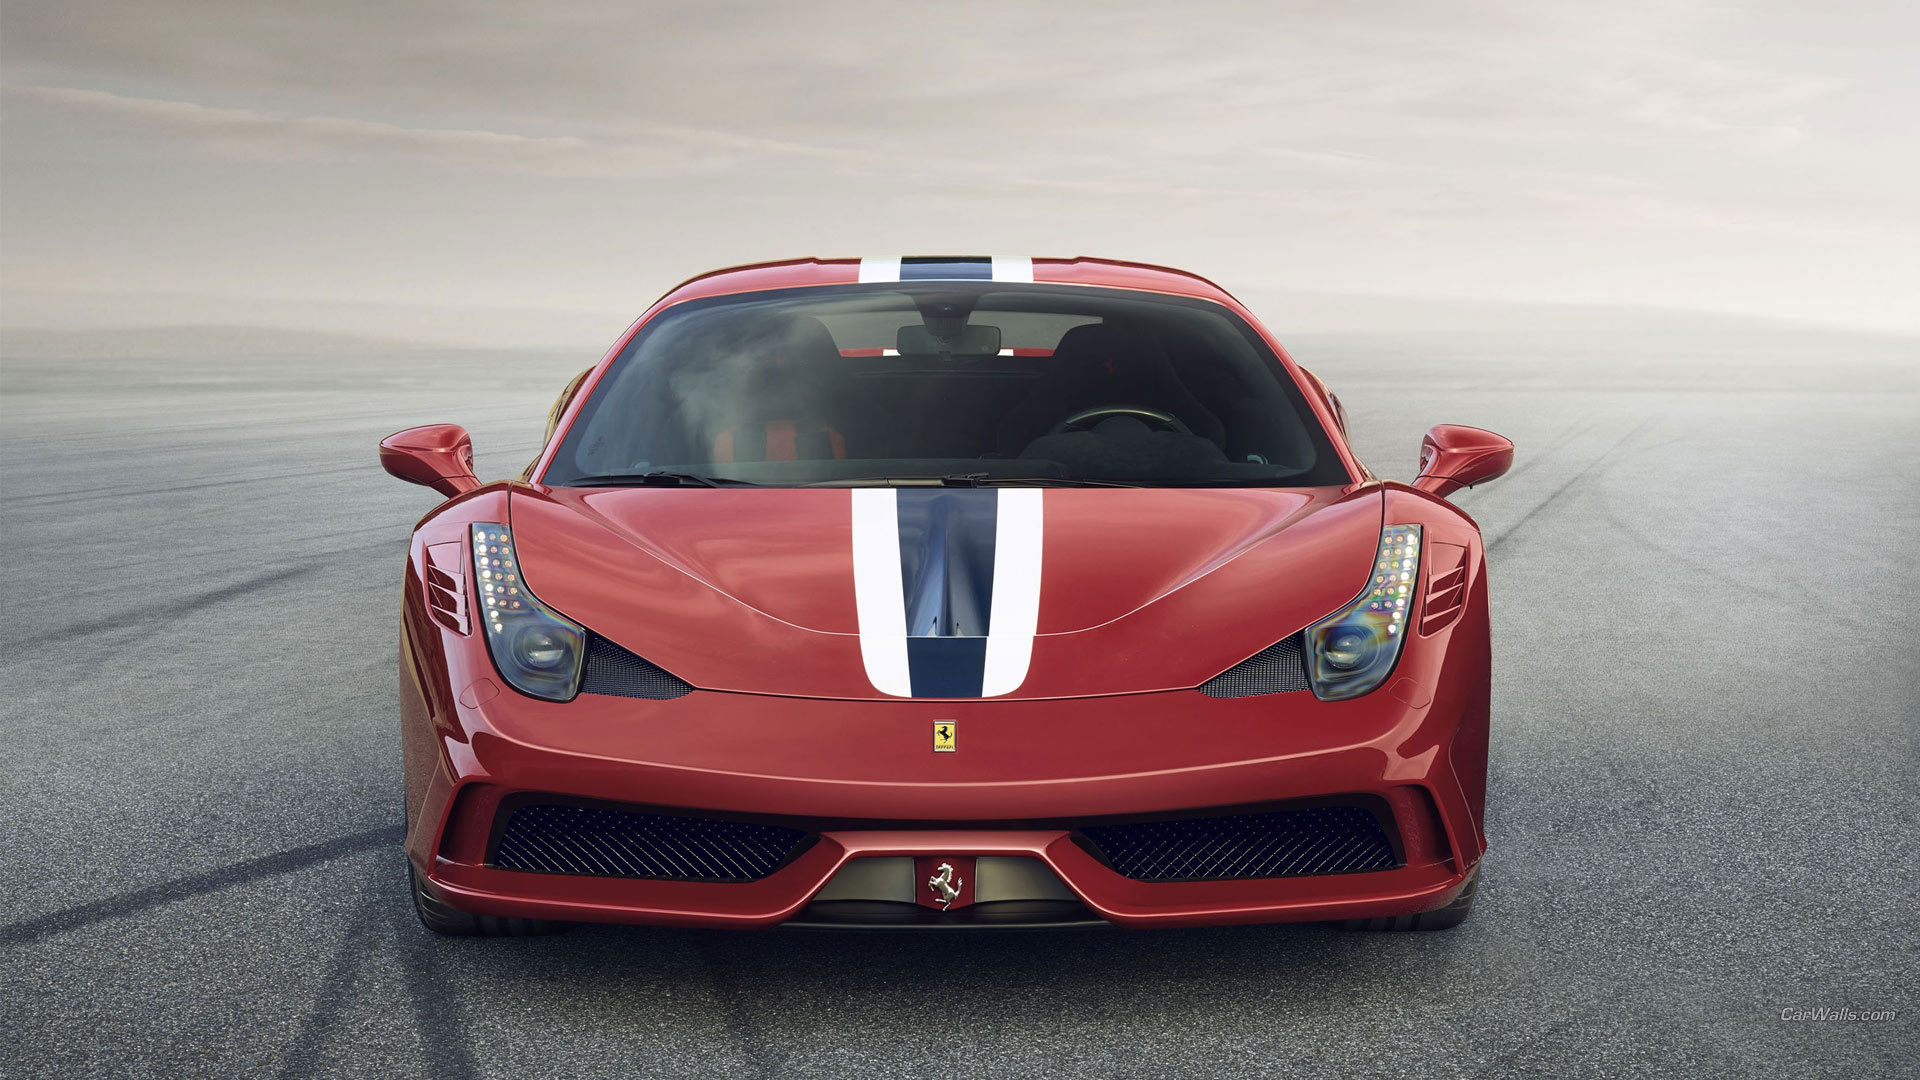 Ferrari Speciale Wallpaper And Background Image